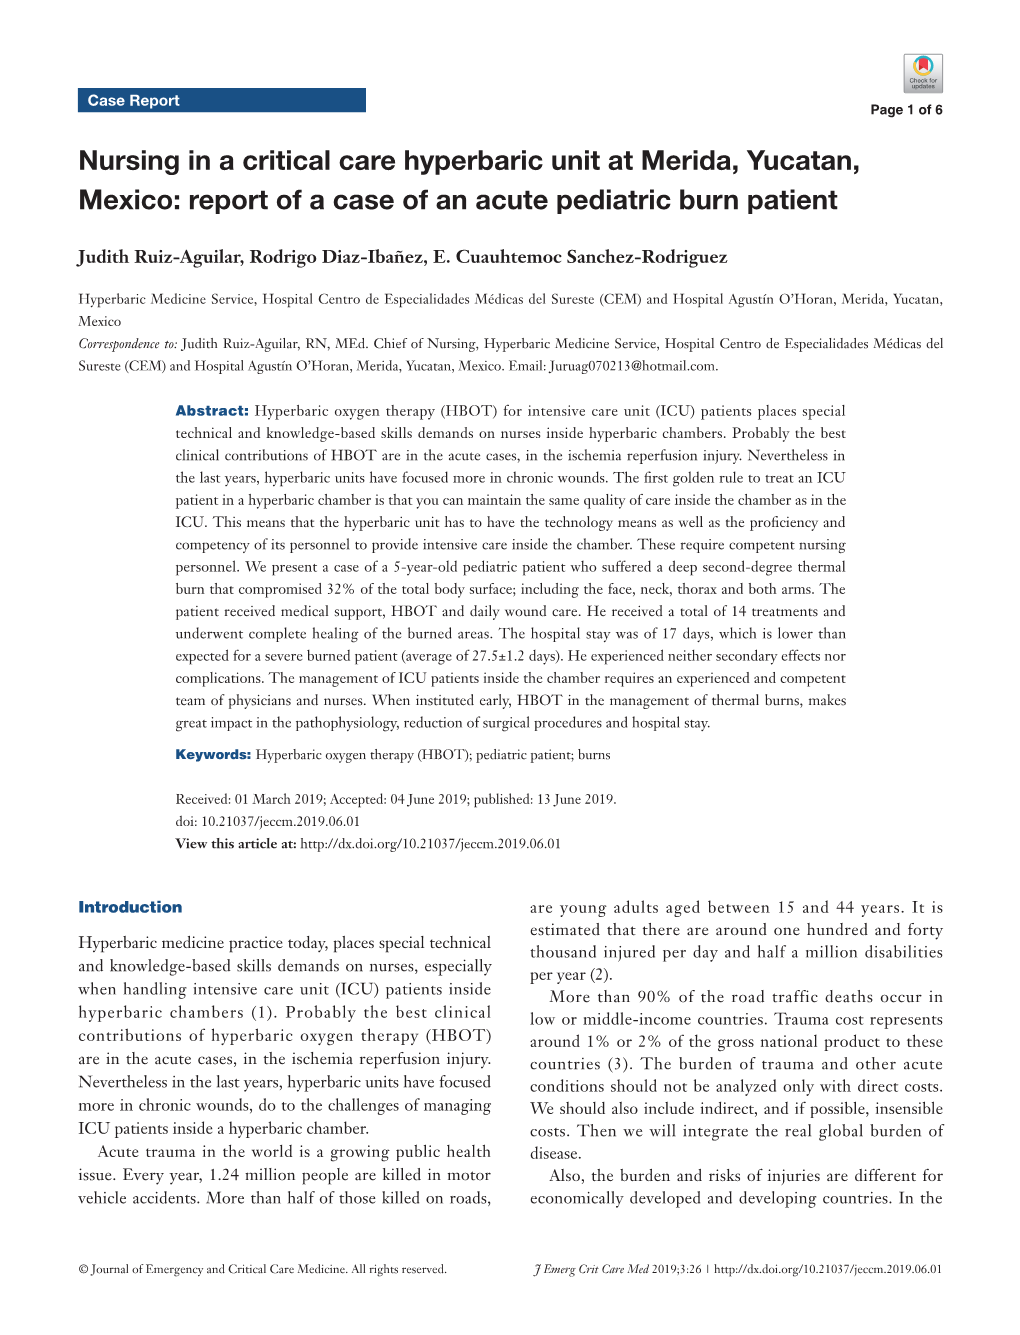 Nursing in a Critical Care Hyperbaric Unit at Merida, Yucatan, Mexico: Report of a Case of an Acute Pediatric Burn Patient